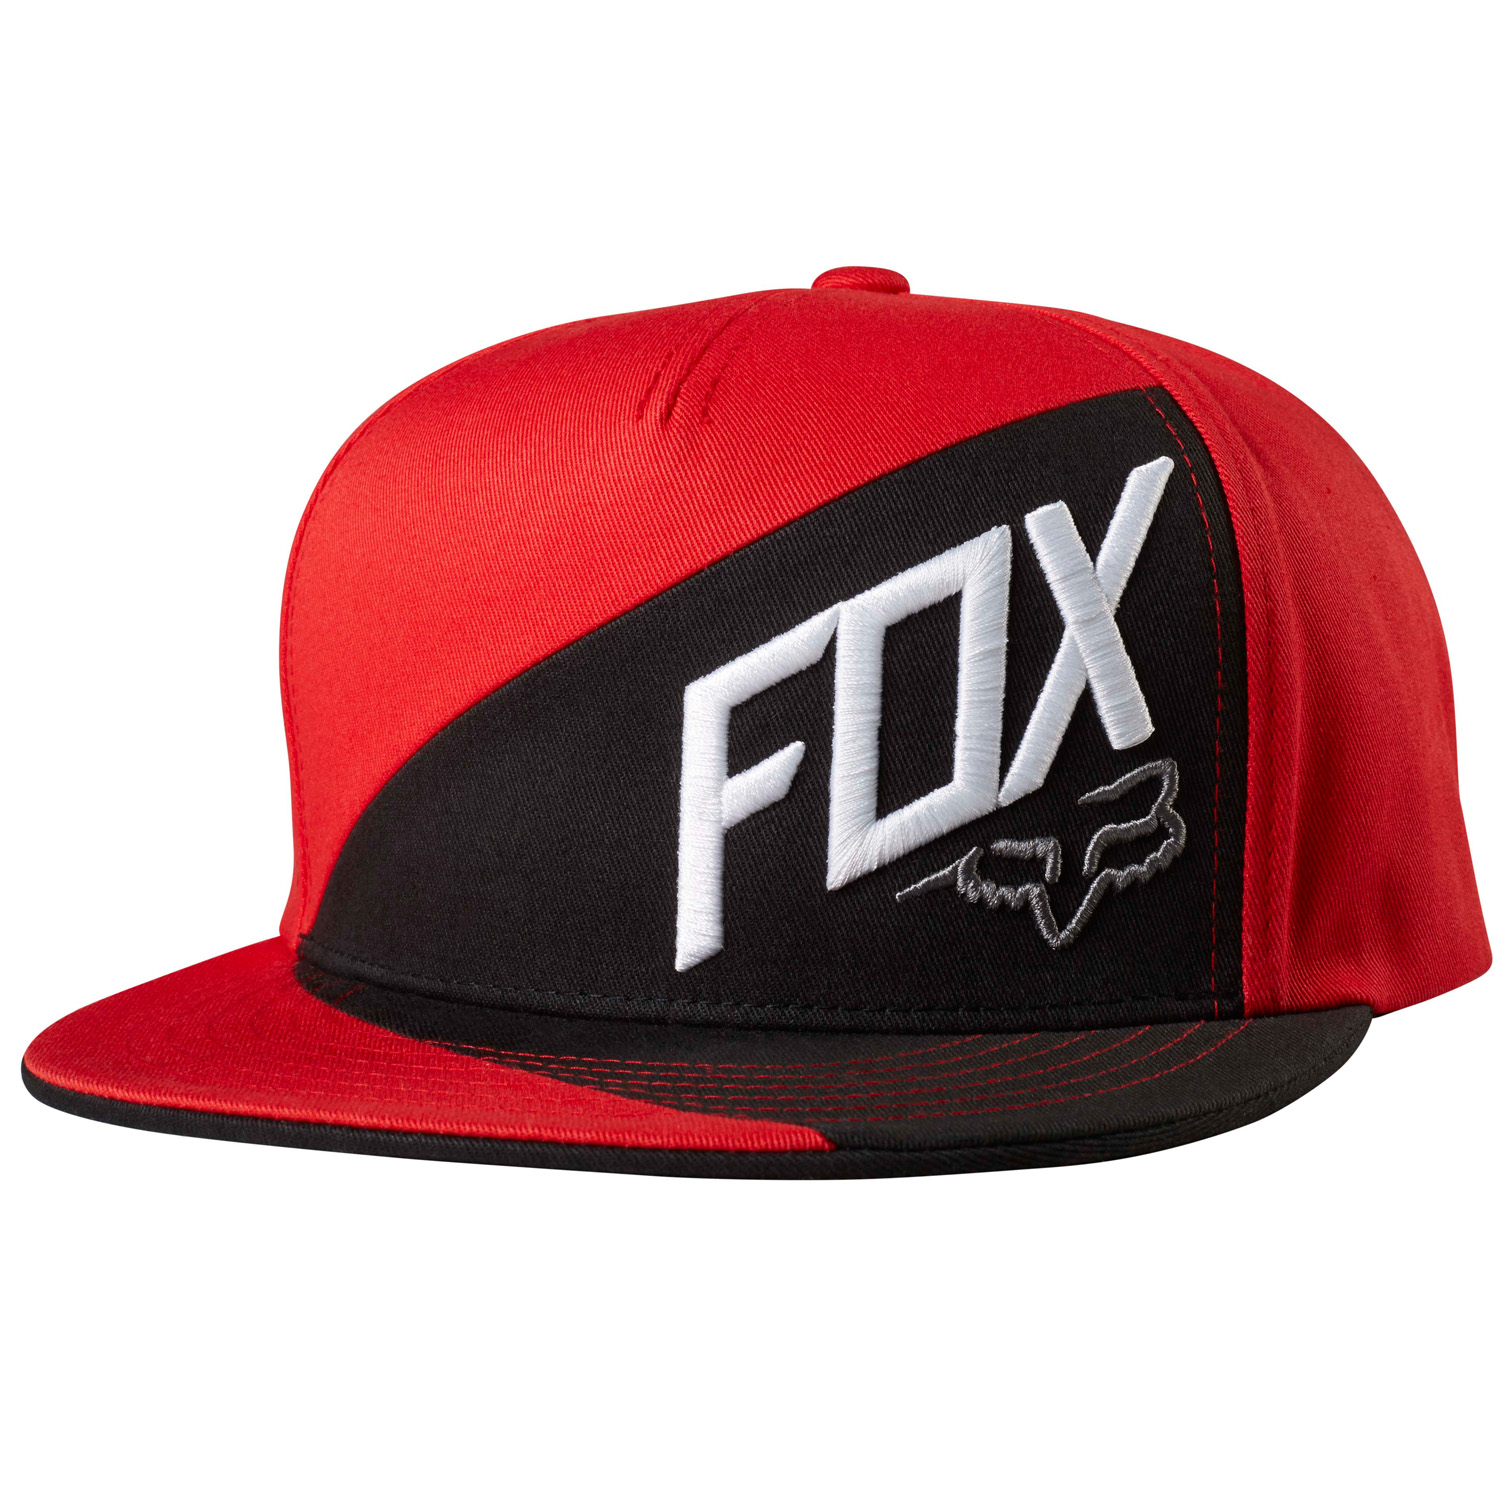 Fox Snapback Cap Overlapped Flame Red